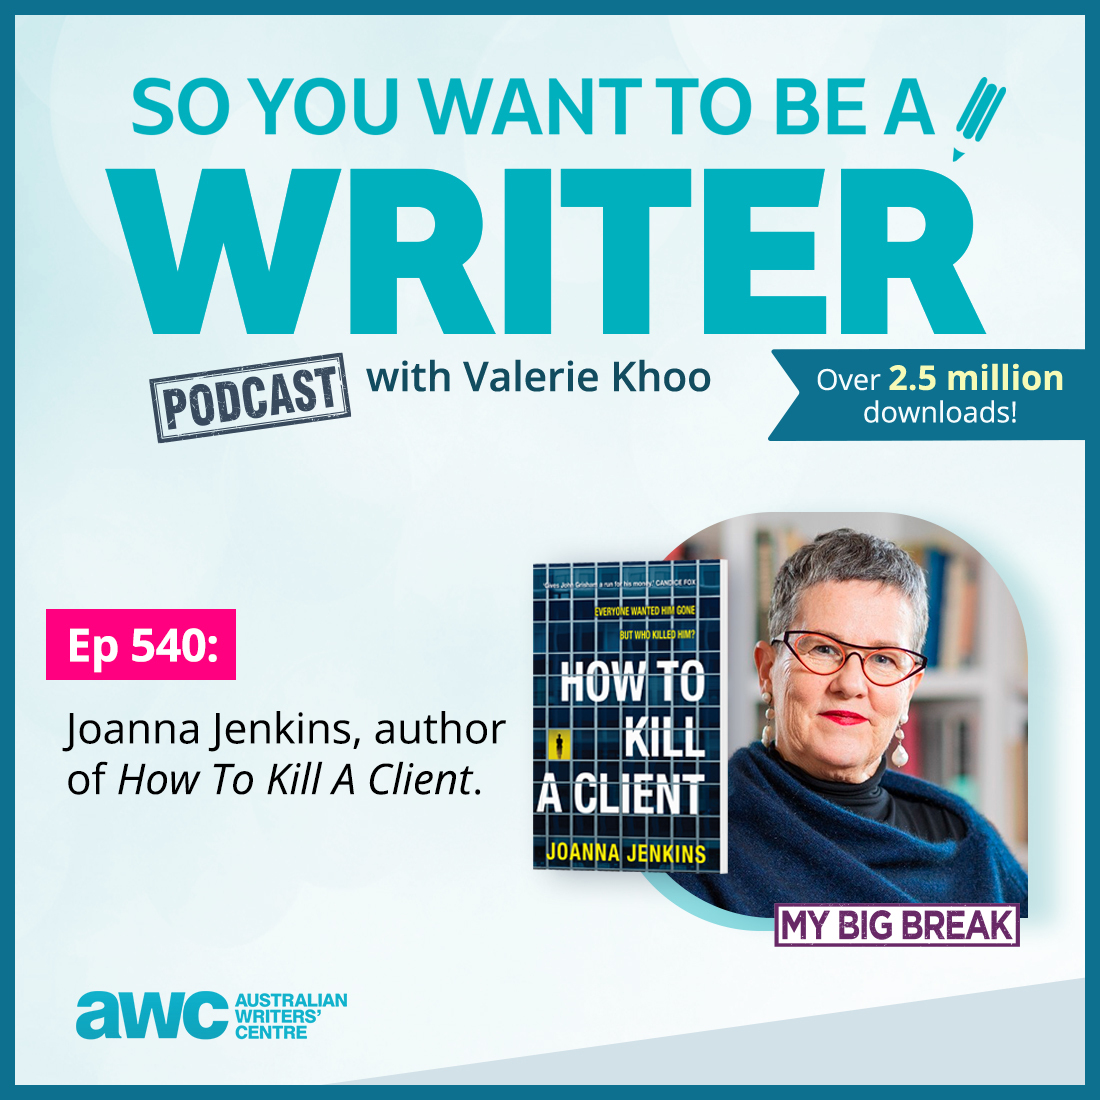 WRITER 540: Joanna Jenkins, author of 'How To Kill A Client'